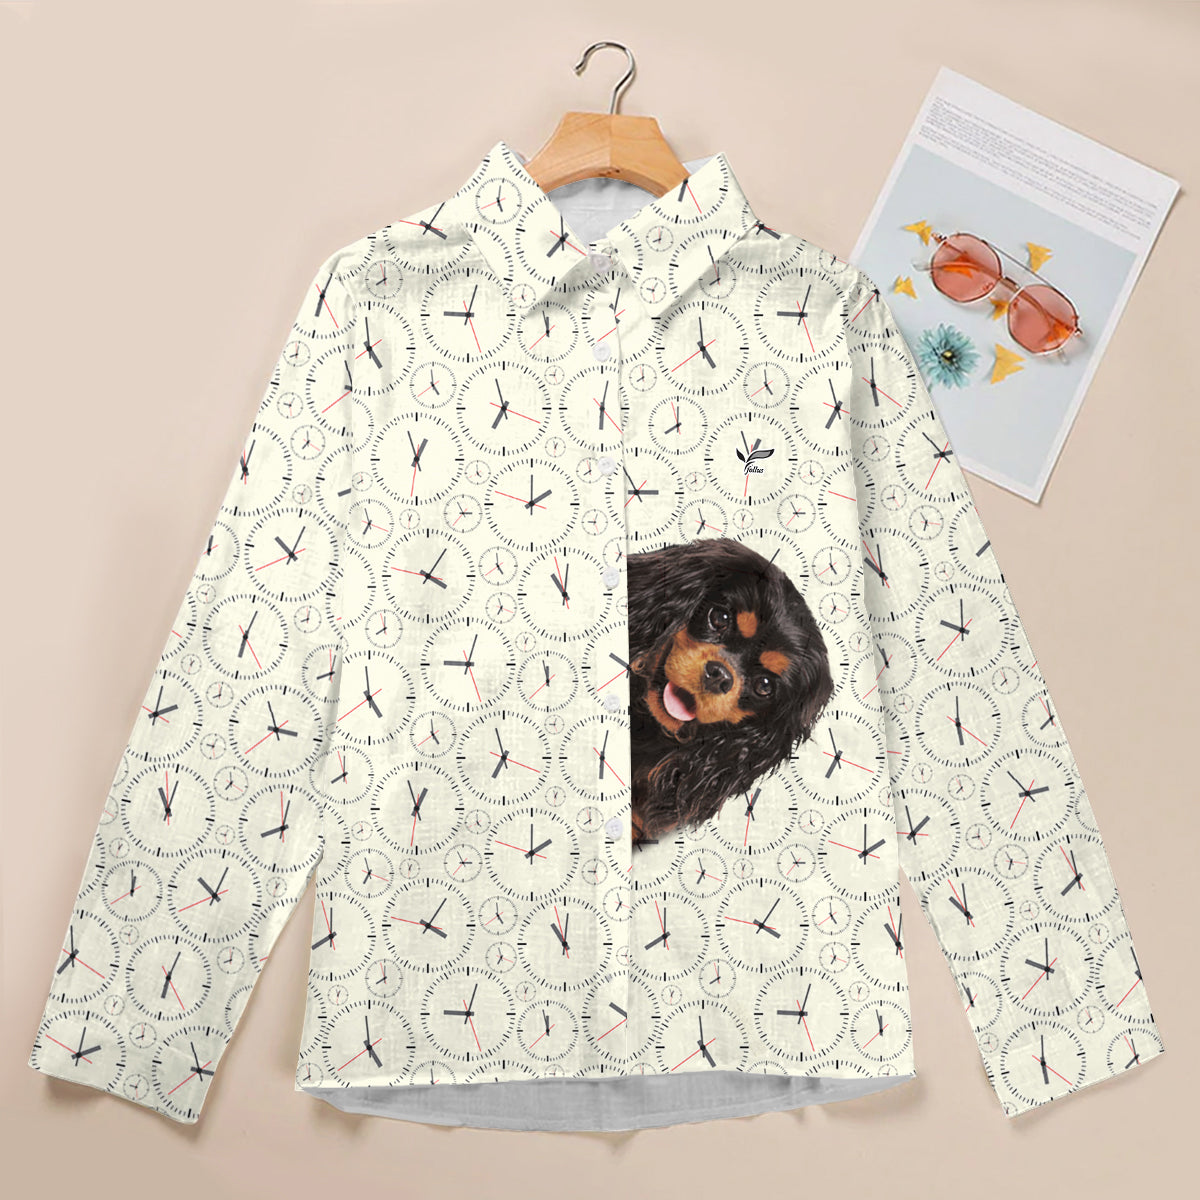 It's Paw Time For Your Cavalier King Charles Spaniel - Follus Women's Long-Sleeve Shirt